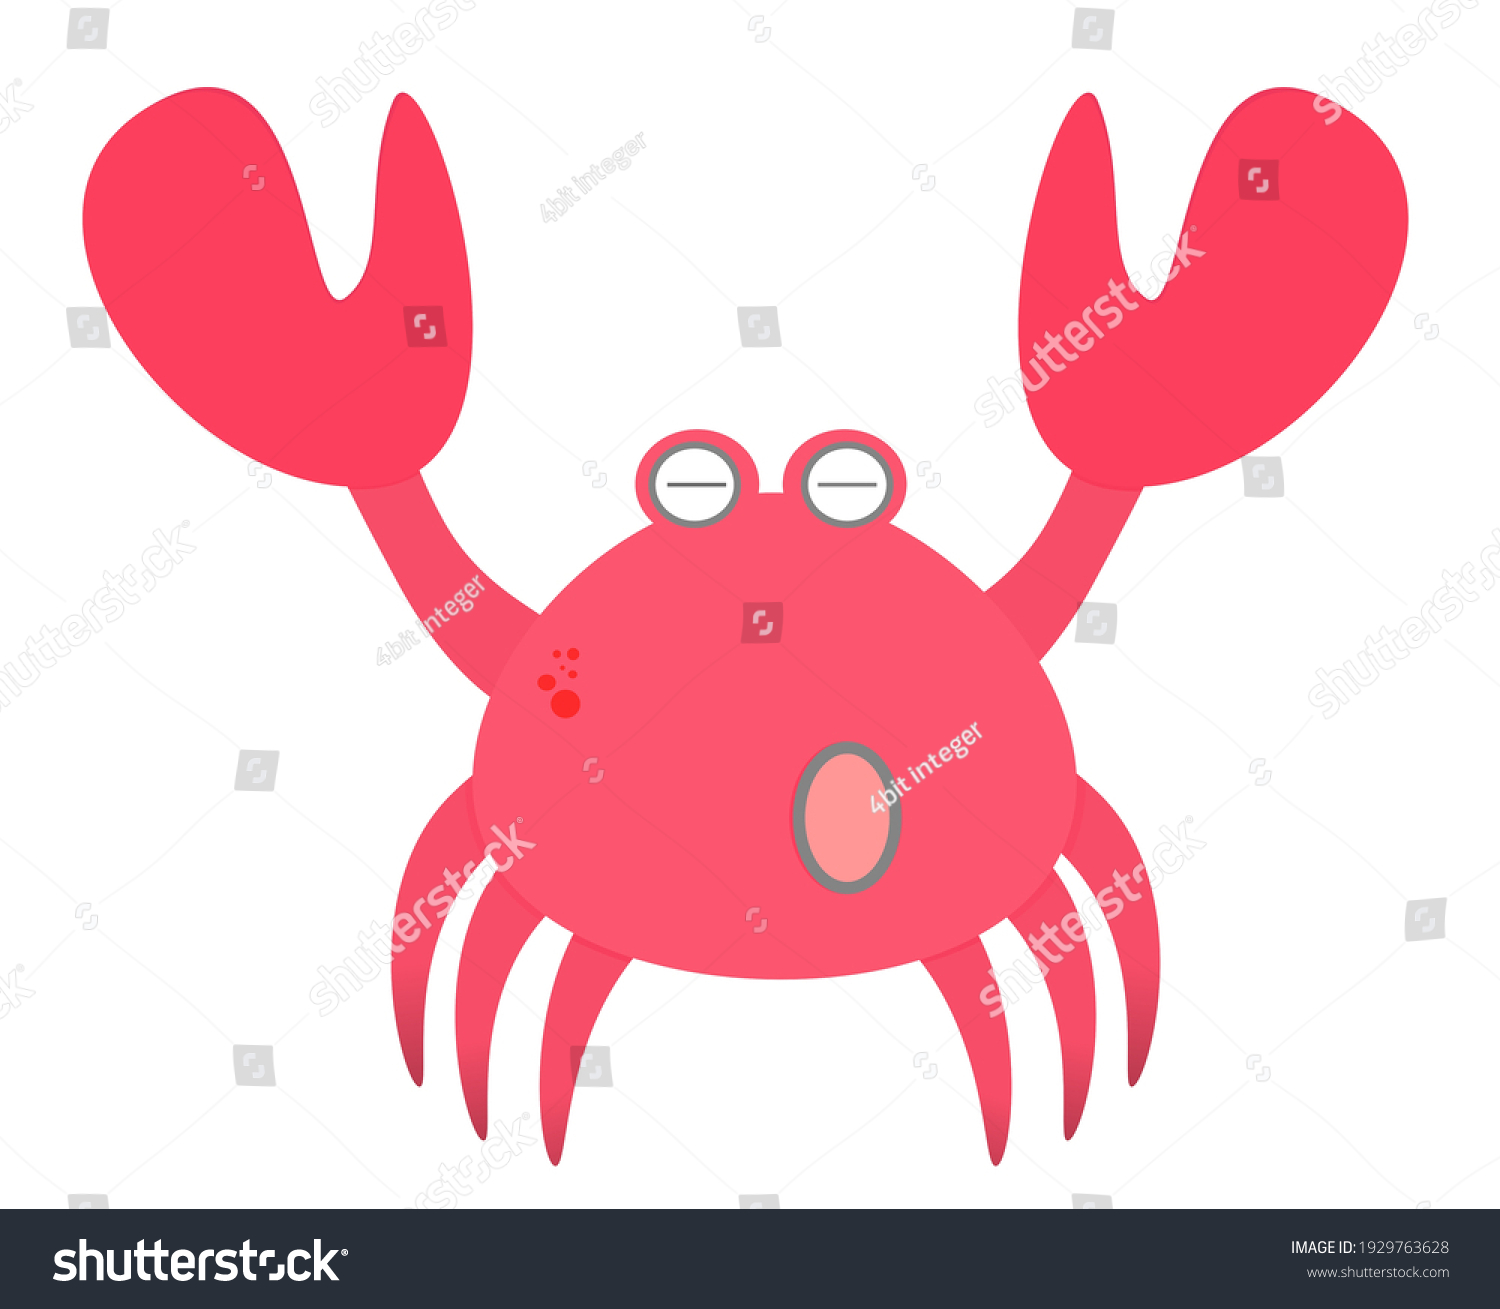 Crab Shell Images, Stock Photos & Vectors | Shutterstock